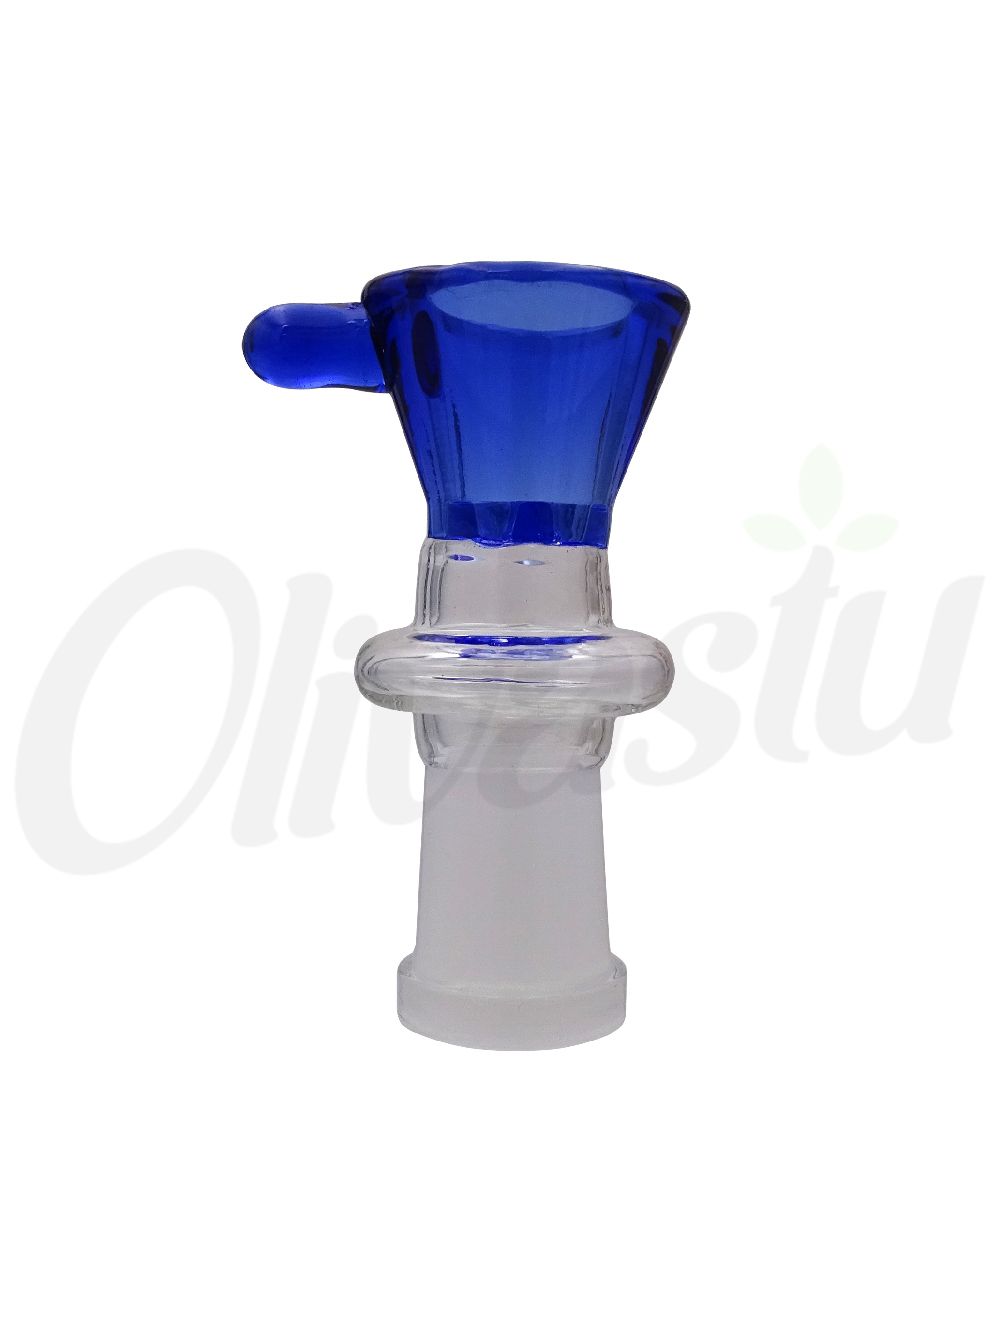 Skunk Labs Compact Twisty Glass Blunt Pipe Bubbler Set W/ Accessories for  sale online